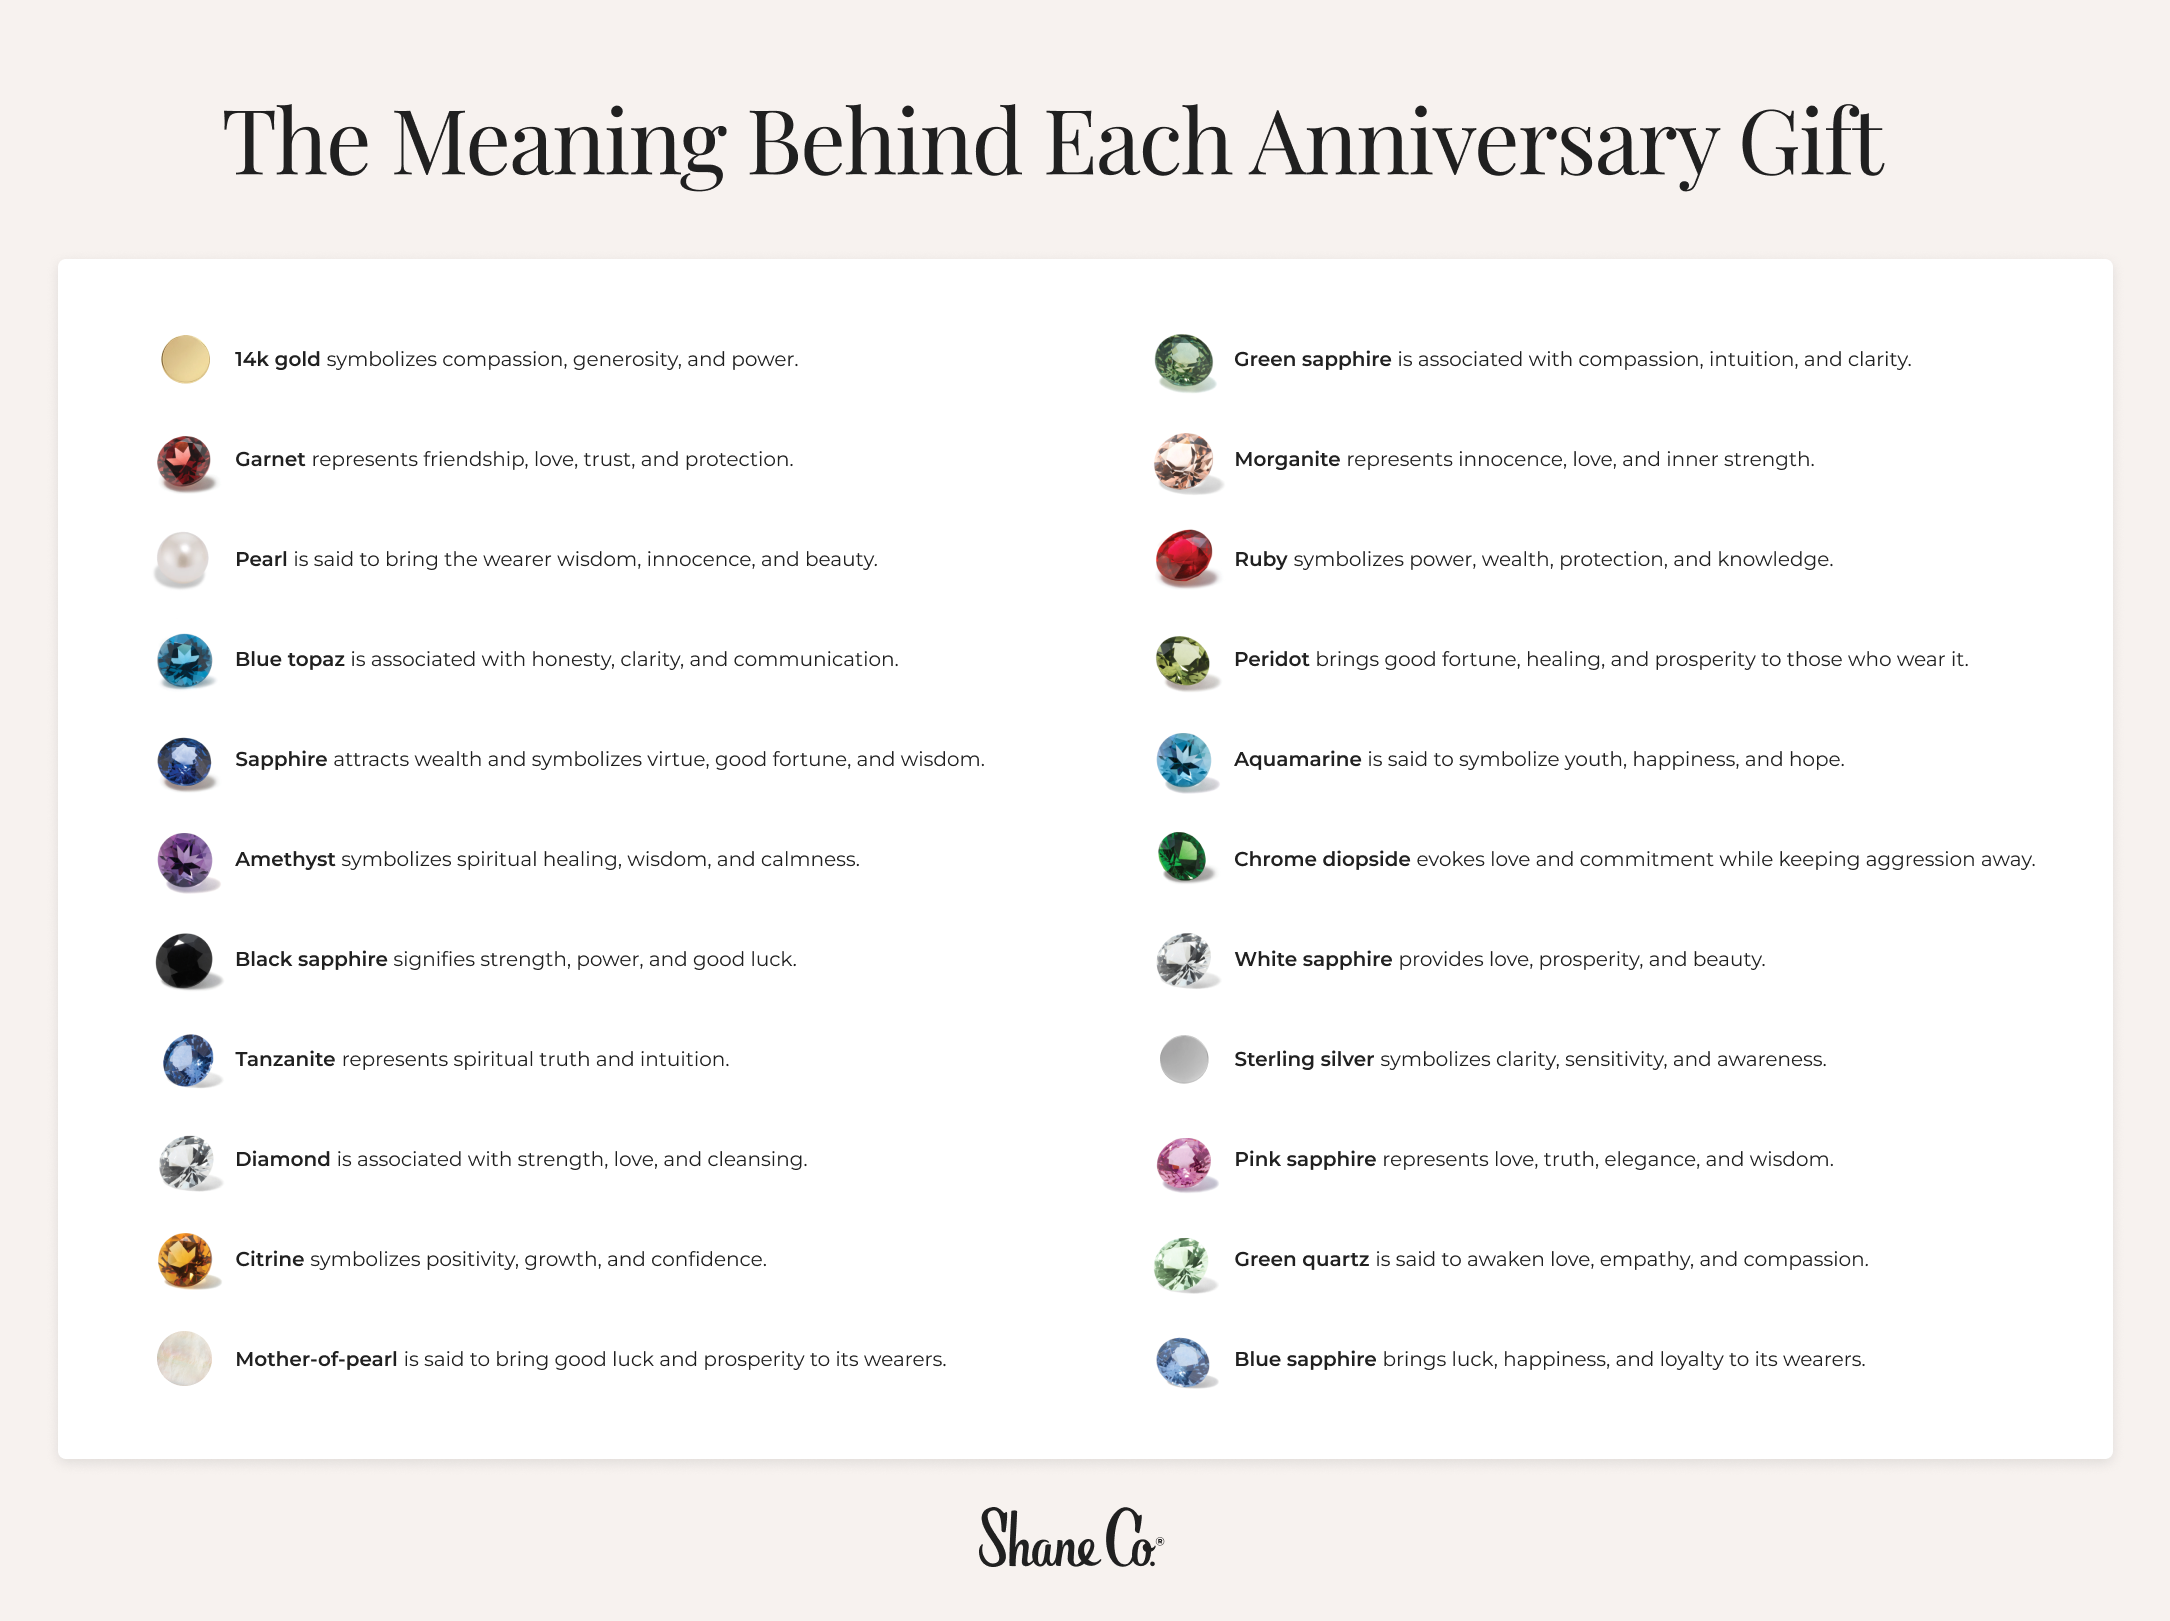 chart of each anniversary gift and it's meaning